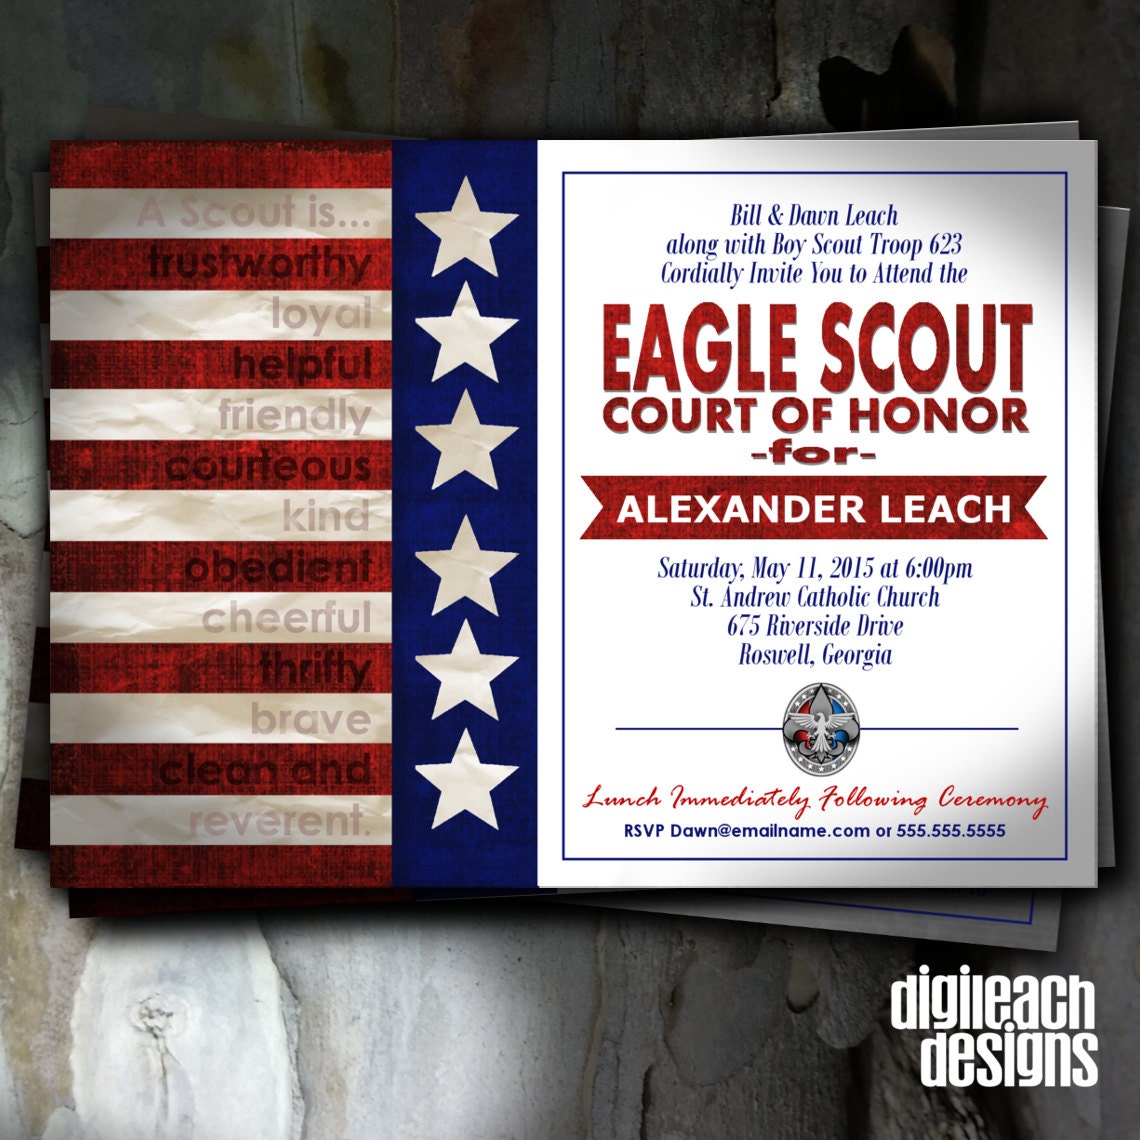 Eagle Scout Court of Honor Invitation: Flag by DigileachDesigns